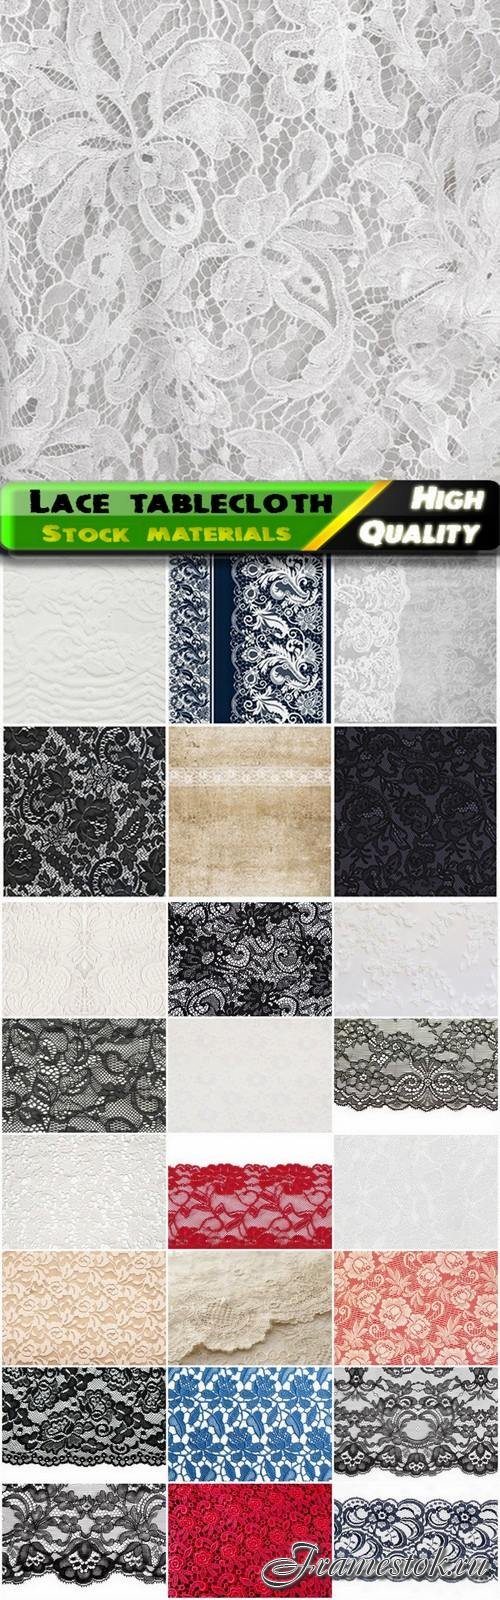 Textures of lace tablecloth with ornaments - 25 HQ Jpg